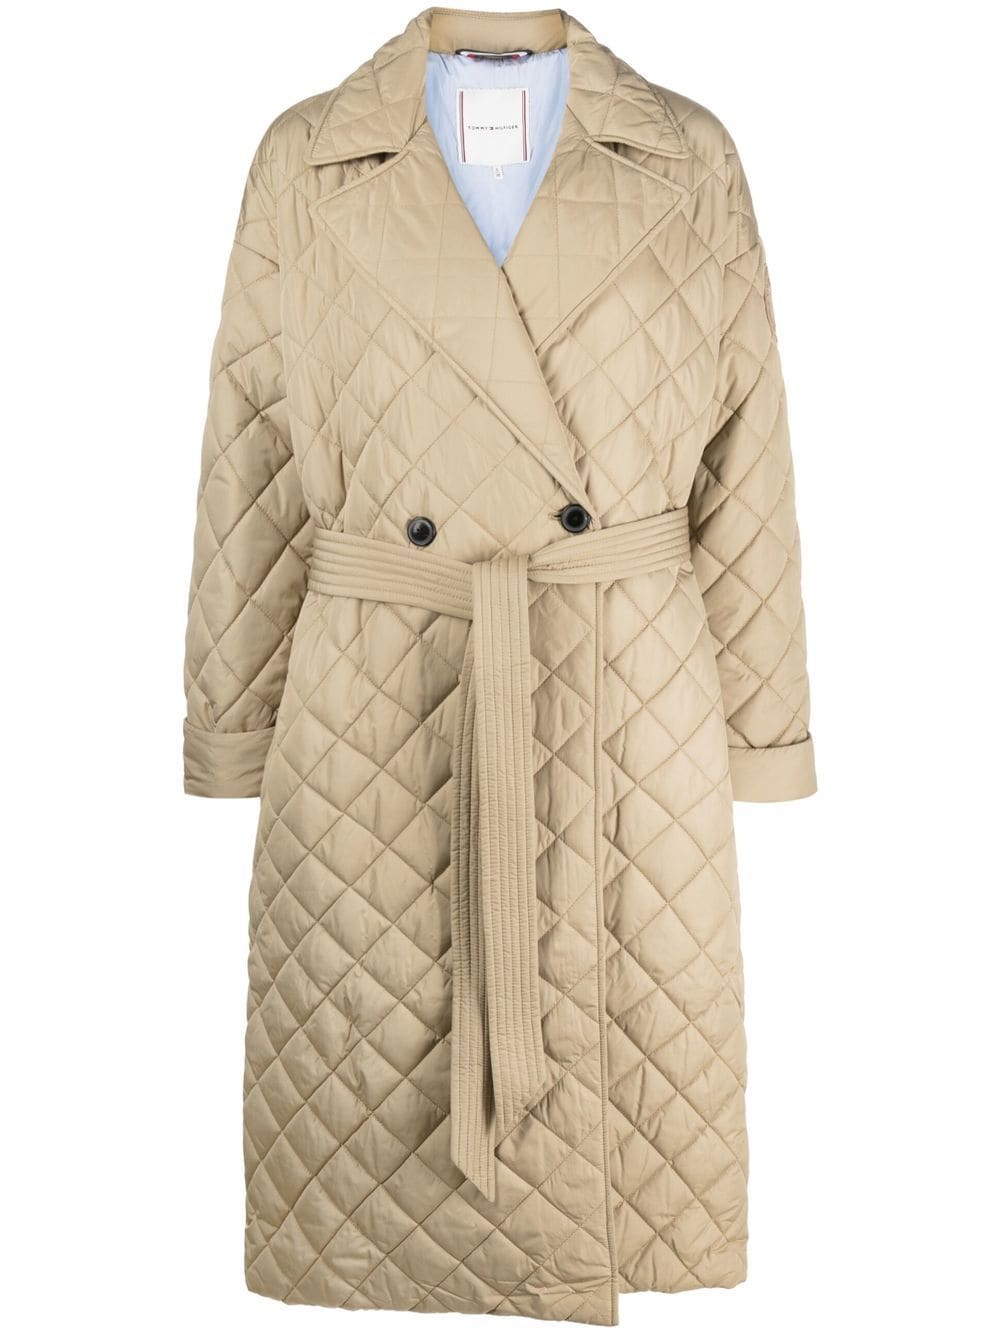 Coat Hilfiger Quilted Sorona - Belted Farfetch Tommy